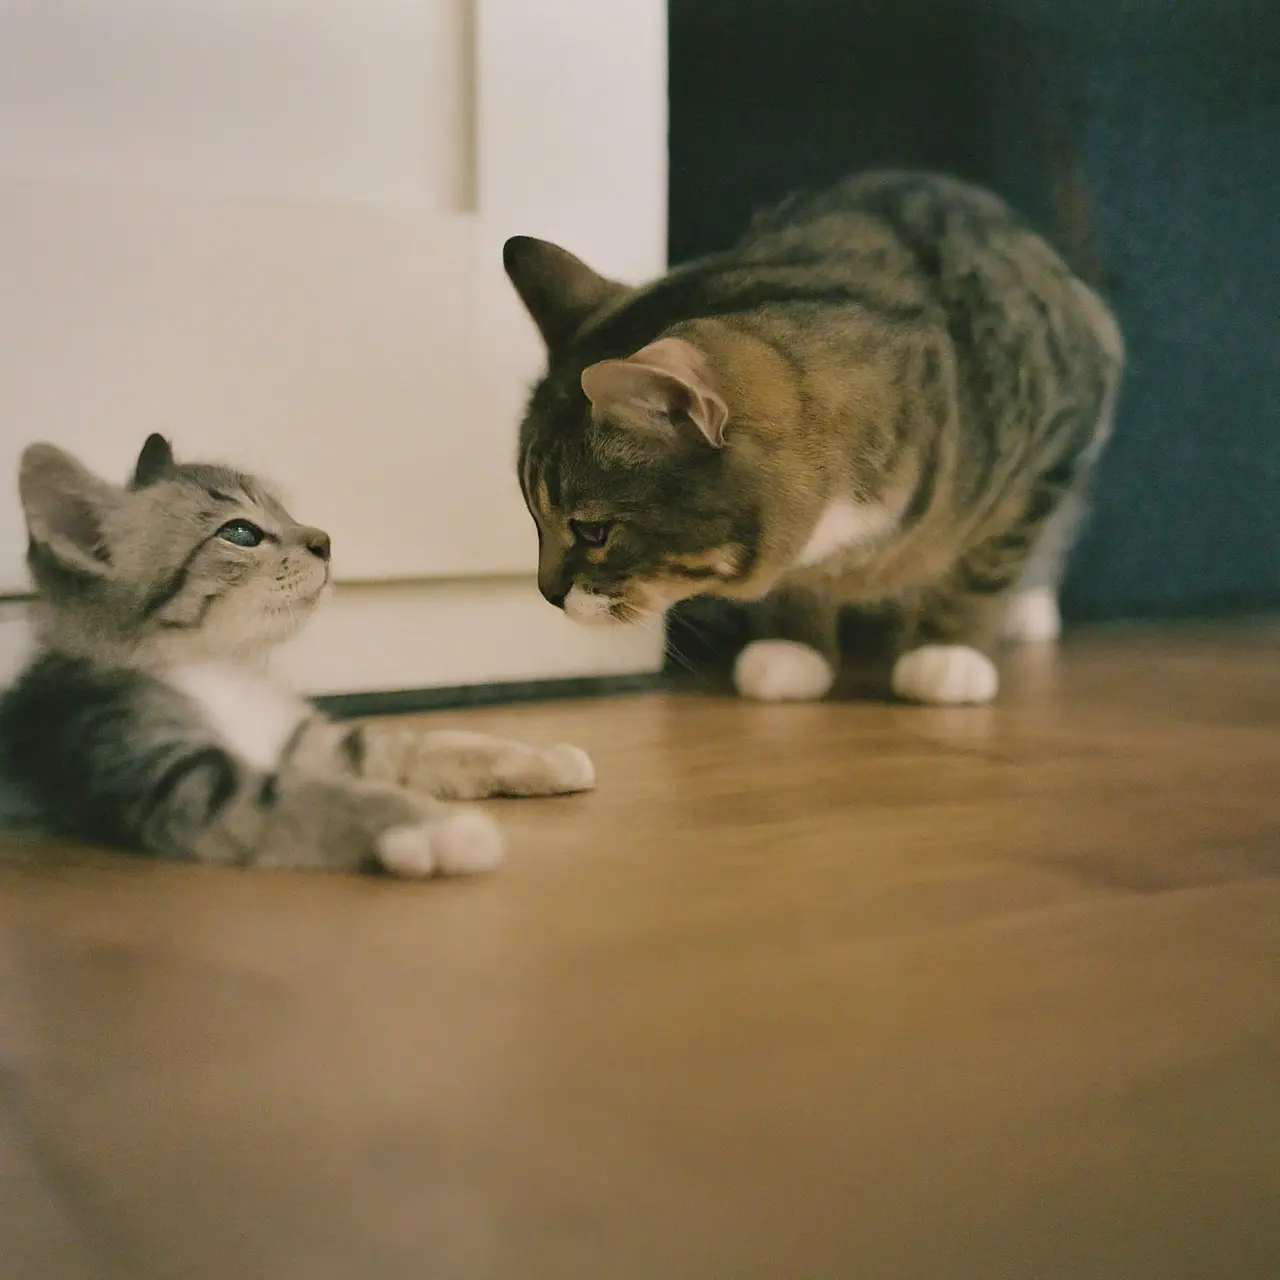 A playful kitten meeting a friendly adult cat indoors. 35mm stock photo